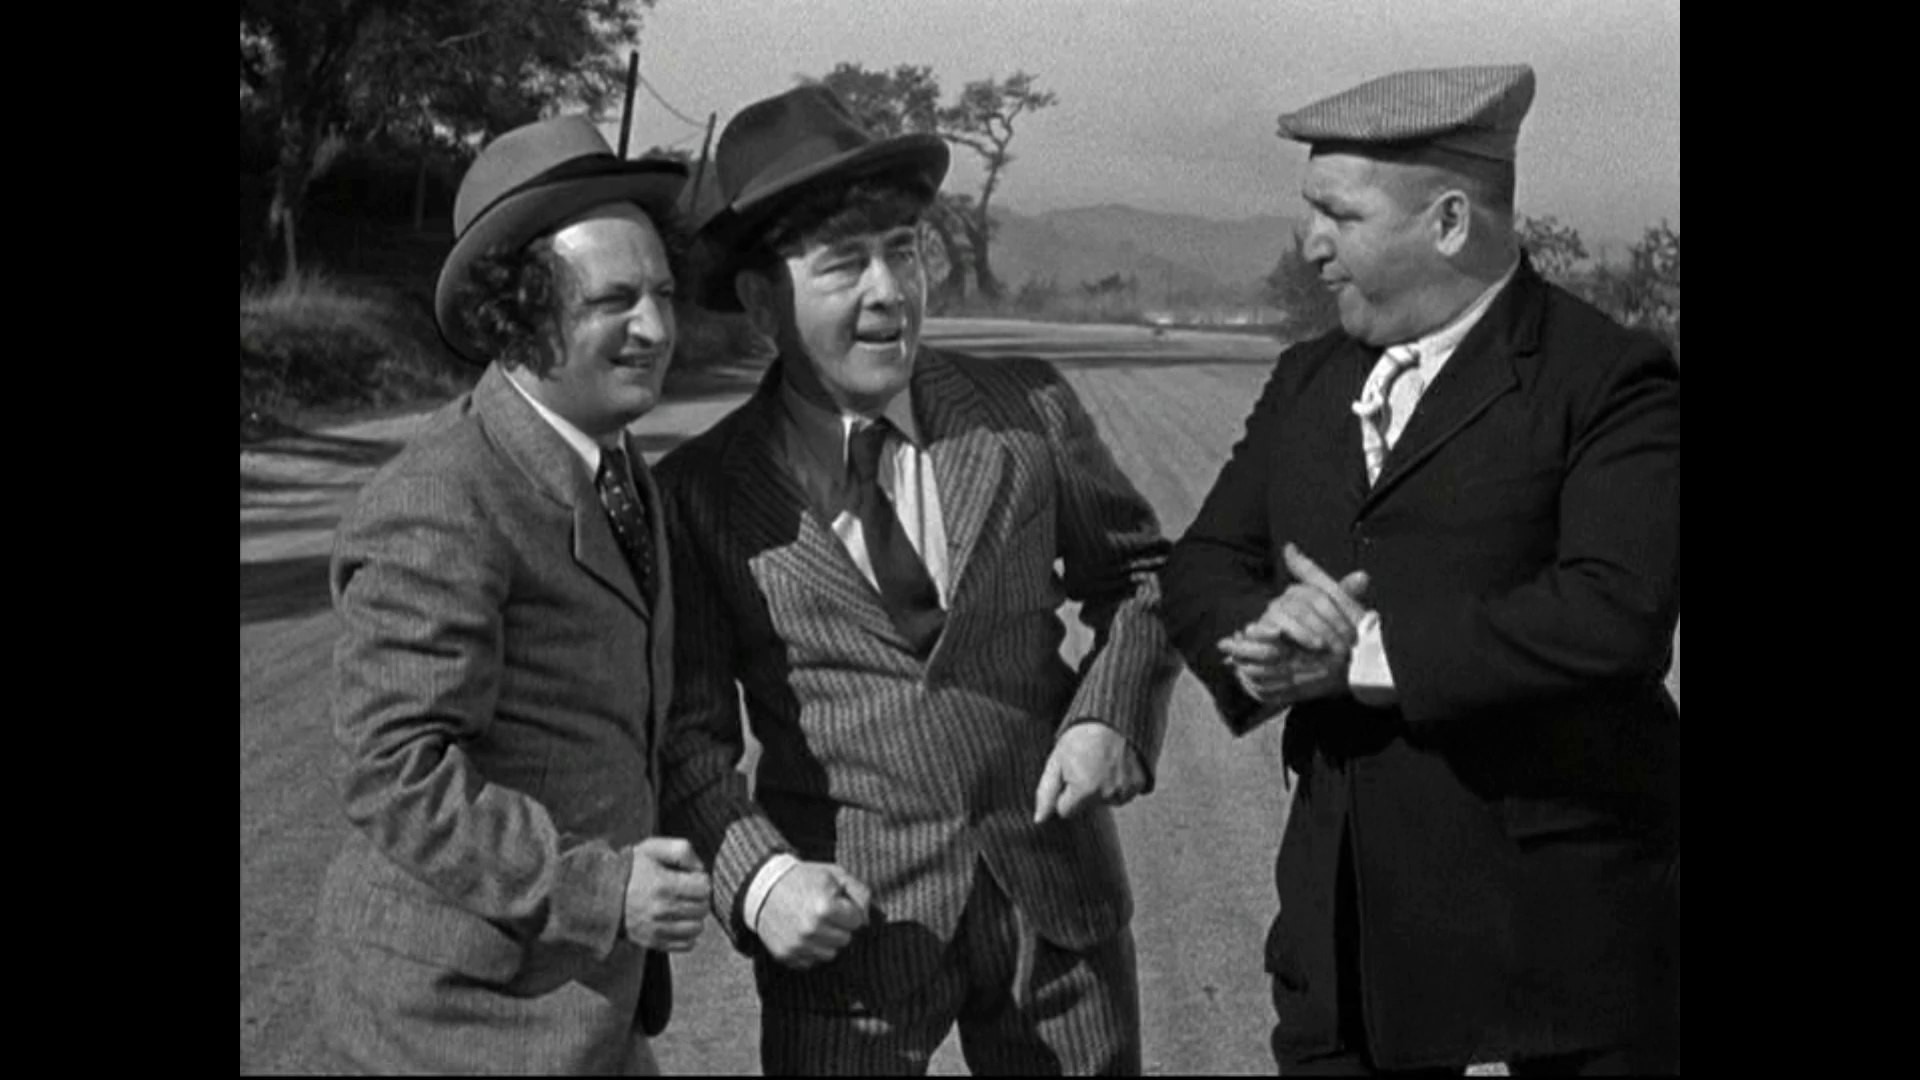 1920x1080 The Three Stooges Oily To Bed E43